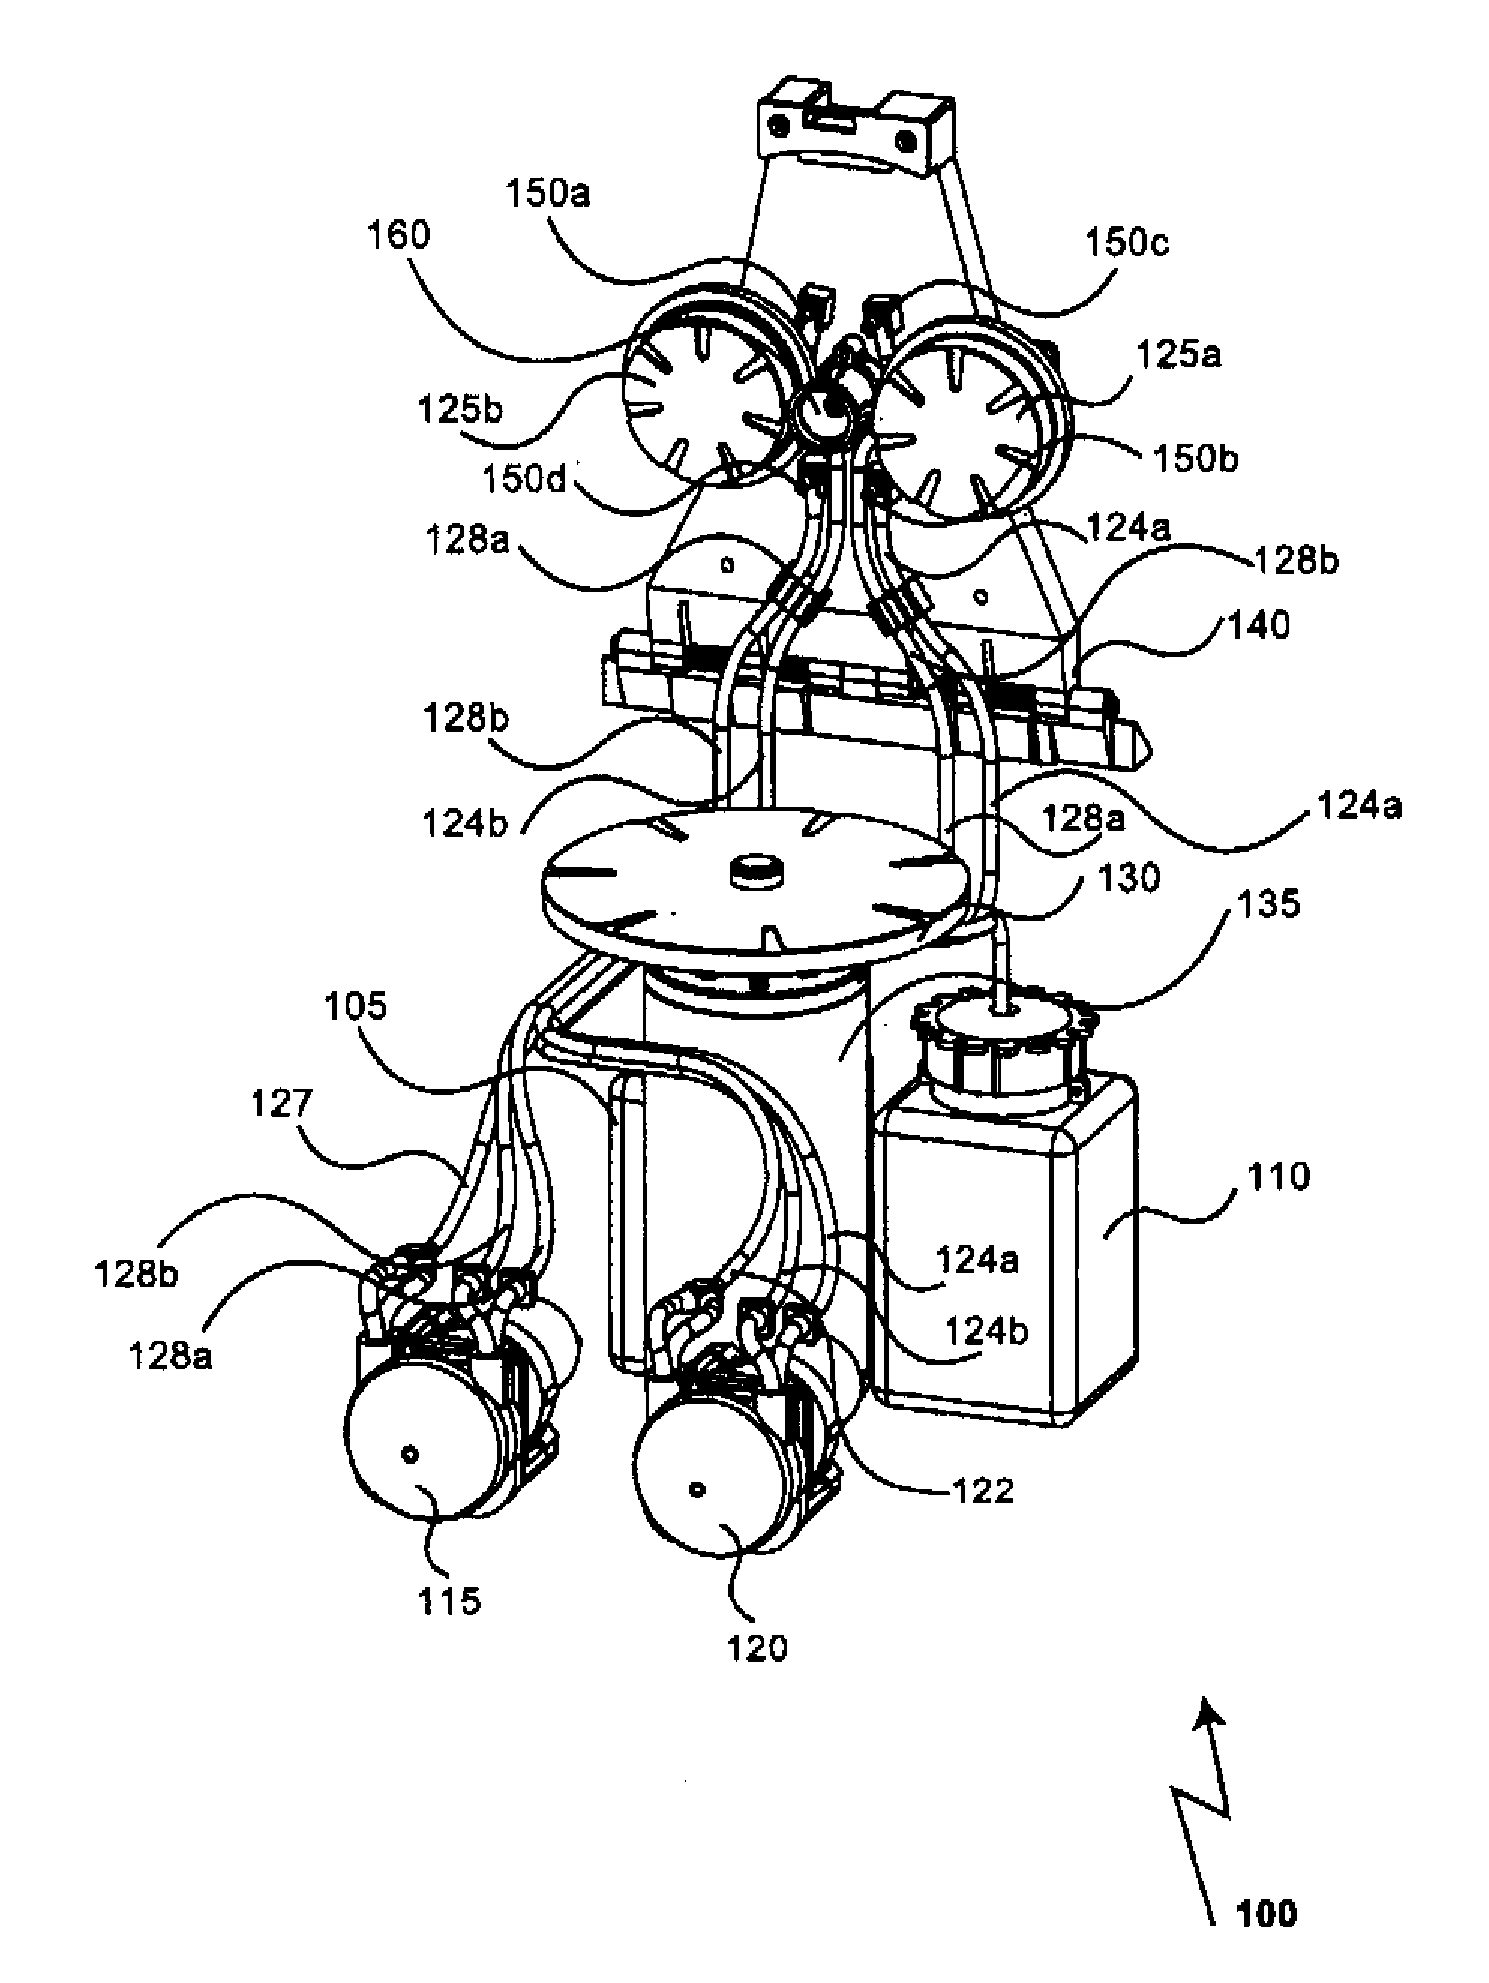 Devices, Methods and Systems for Restoring Optical Discs